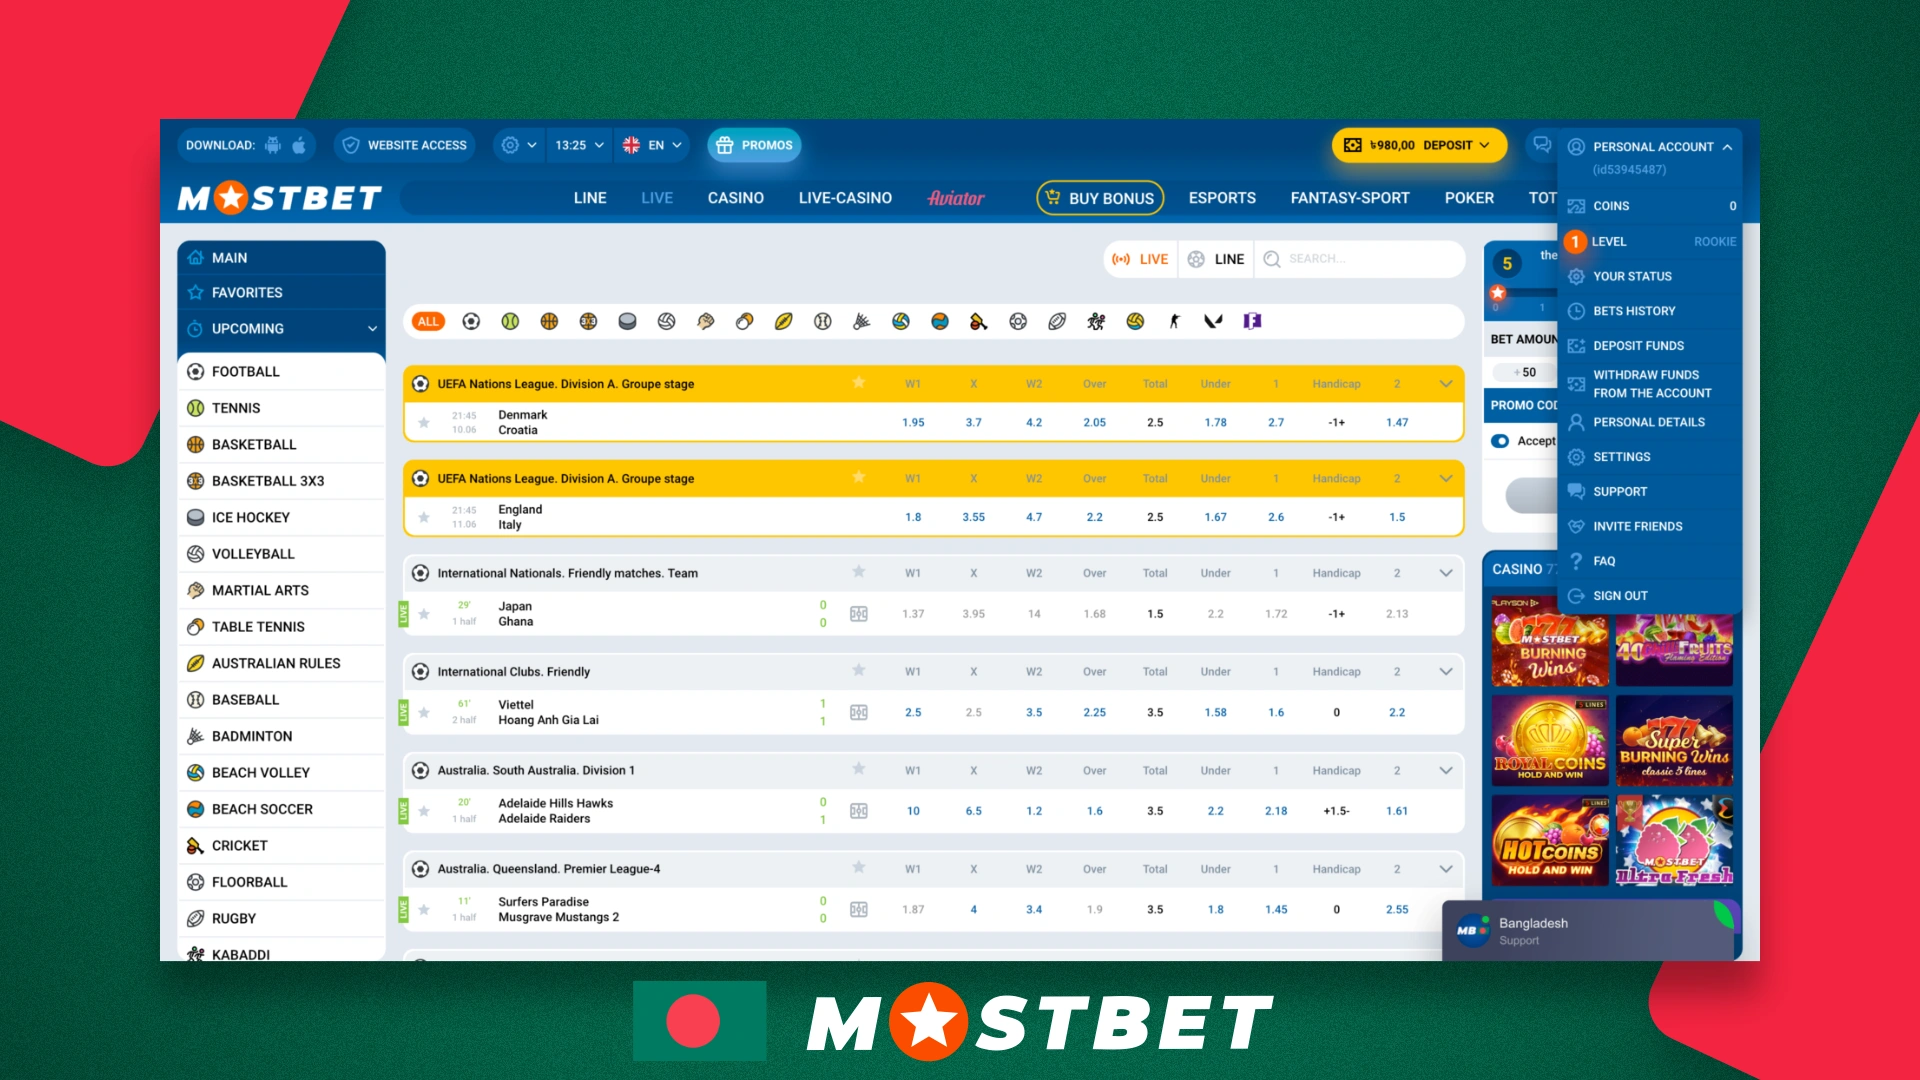 List of live events on which you can bet on the Mostbet website in real time